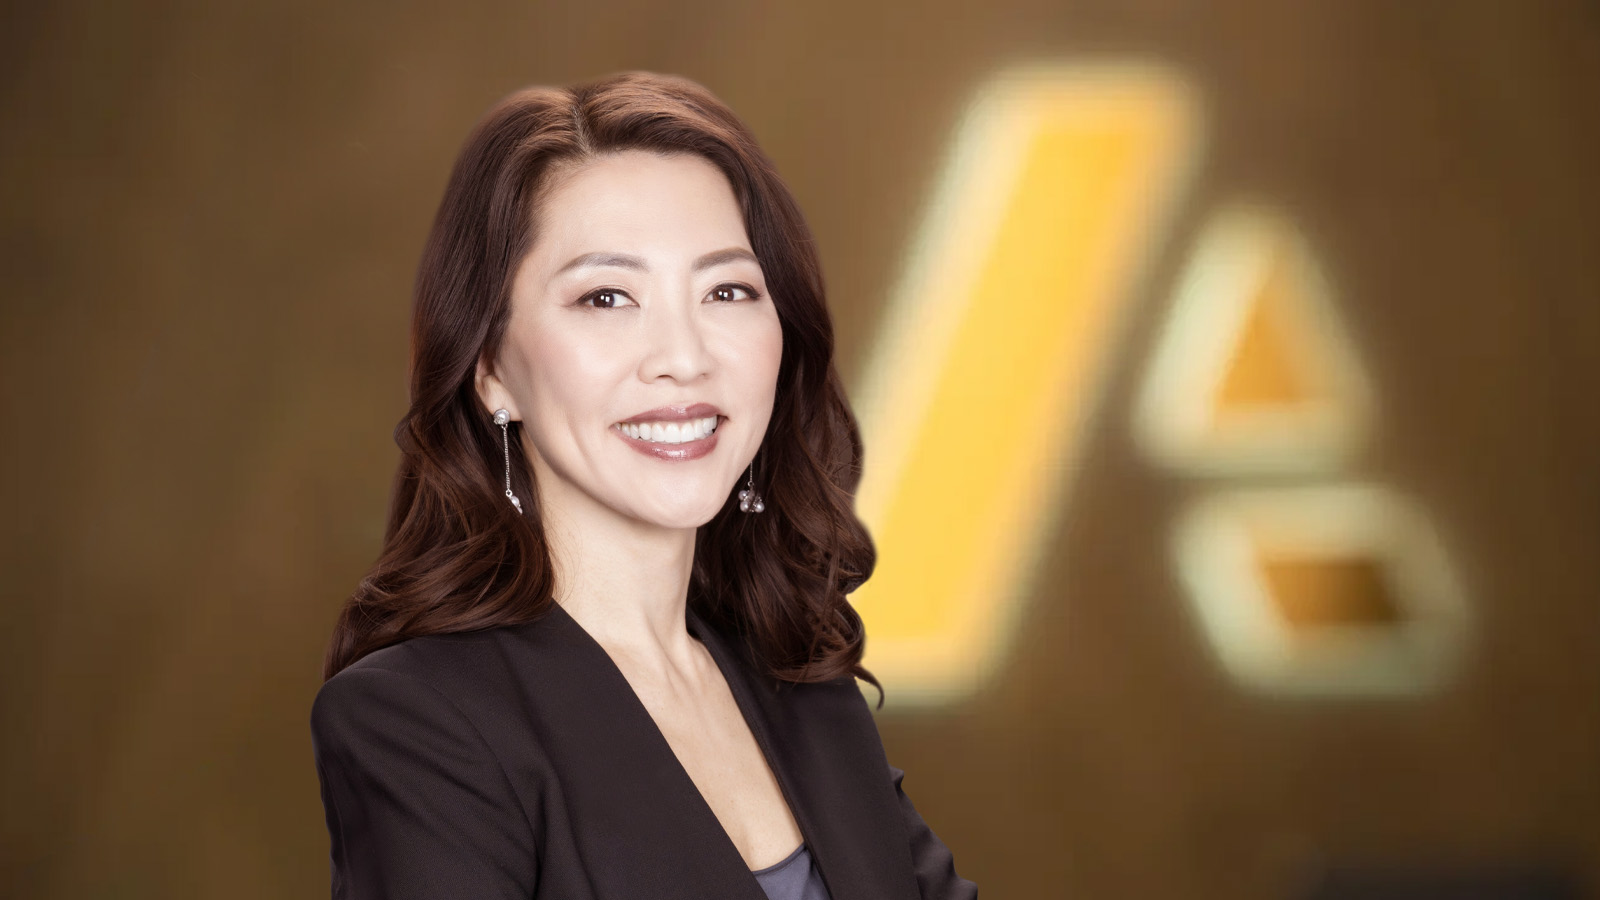 Businesswoman, Hyune Hand, Chief Customer Officer,  with shoulder-length hair curled, posing in front of Anaplan logo